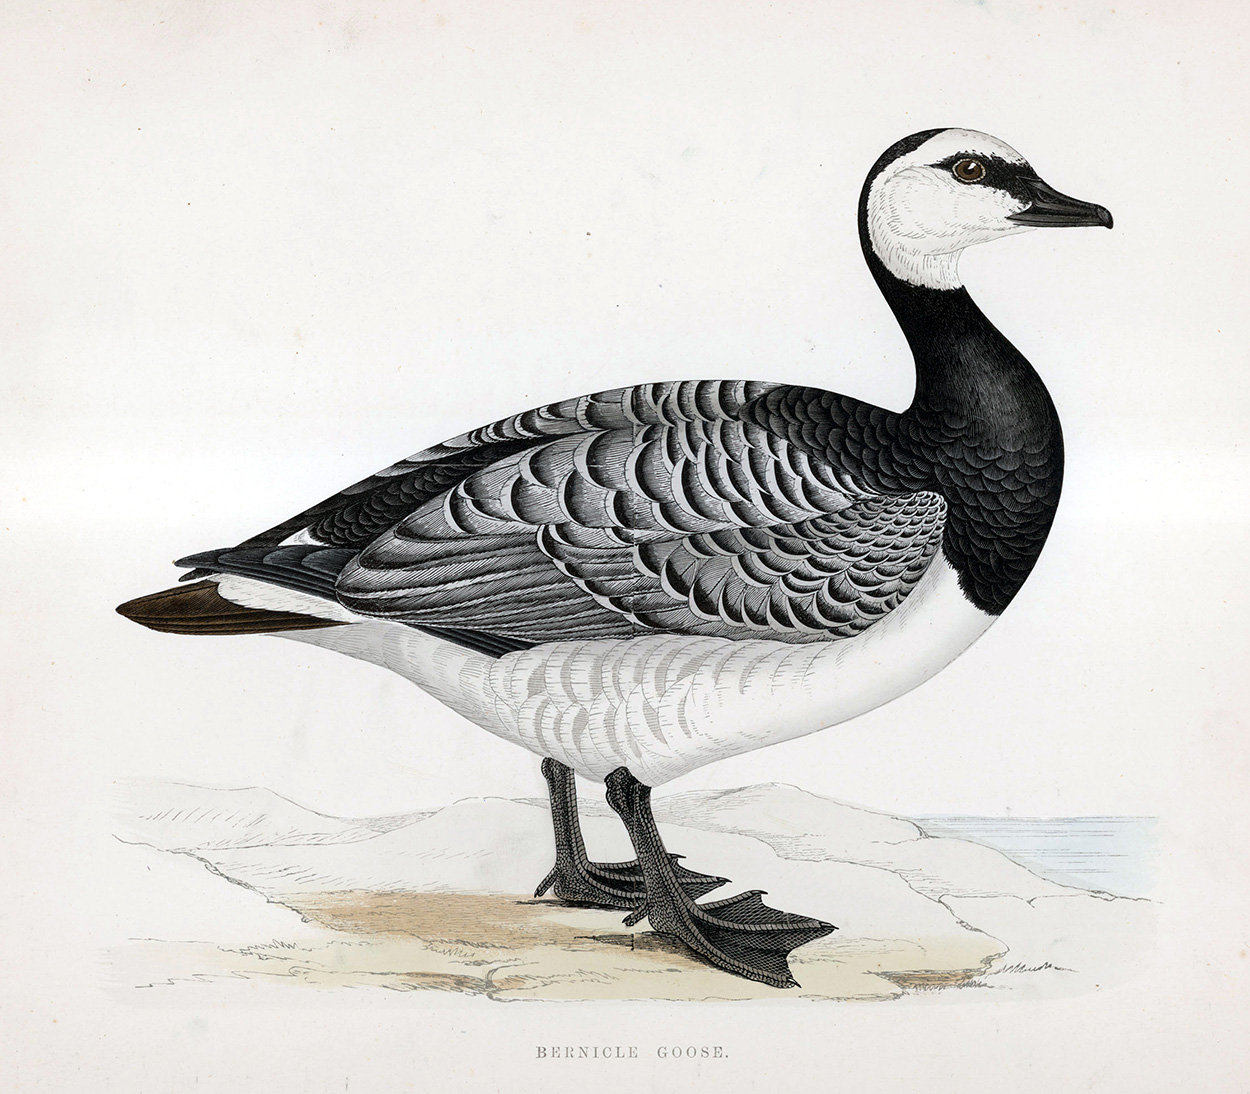 Bernicle Goose - hand coloured lithograph 1891 (Print) art by Beverley R Morris at The Illustration Art Gallery